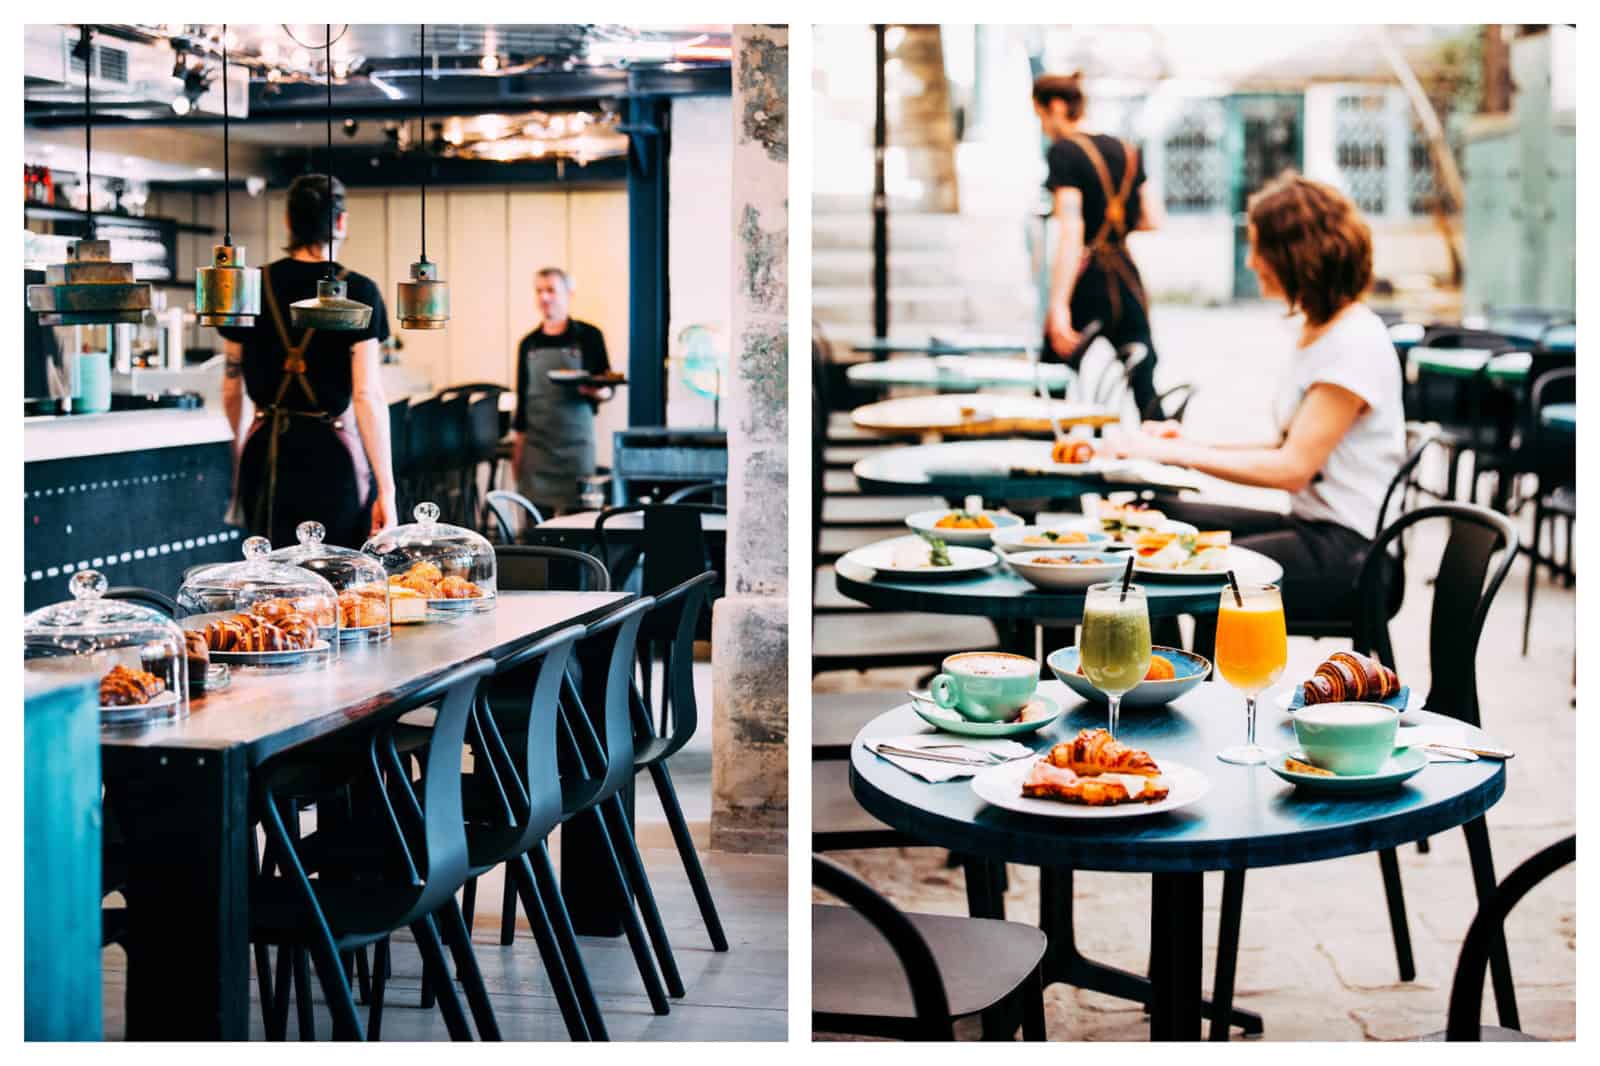 The industrial-style interiors of Marcello (left) and an outdoor table with brunch for two on a terrace in Paris' Saint Germain neighborhood (right).